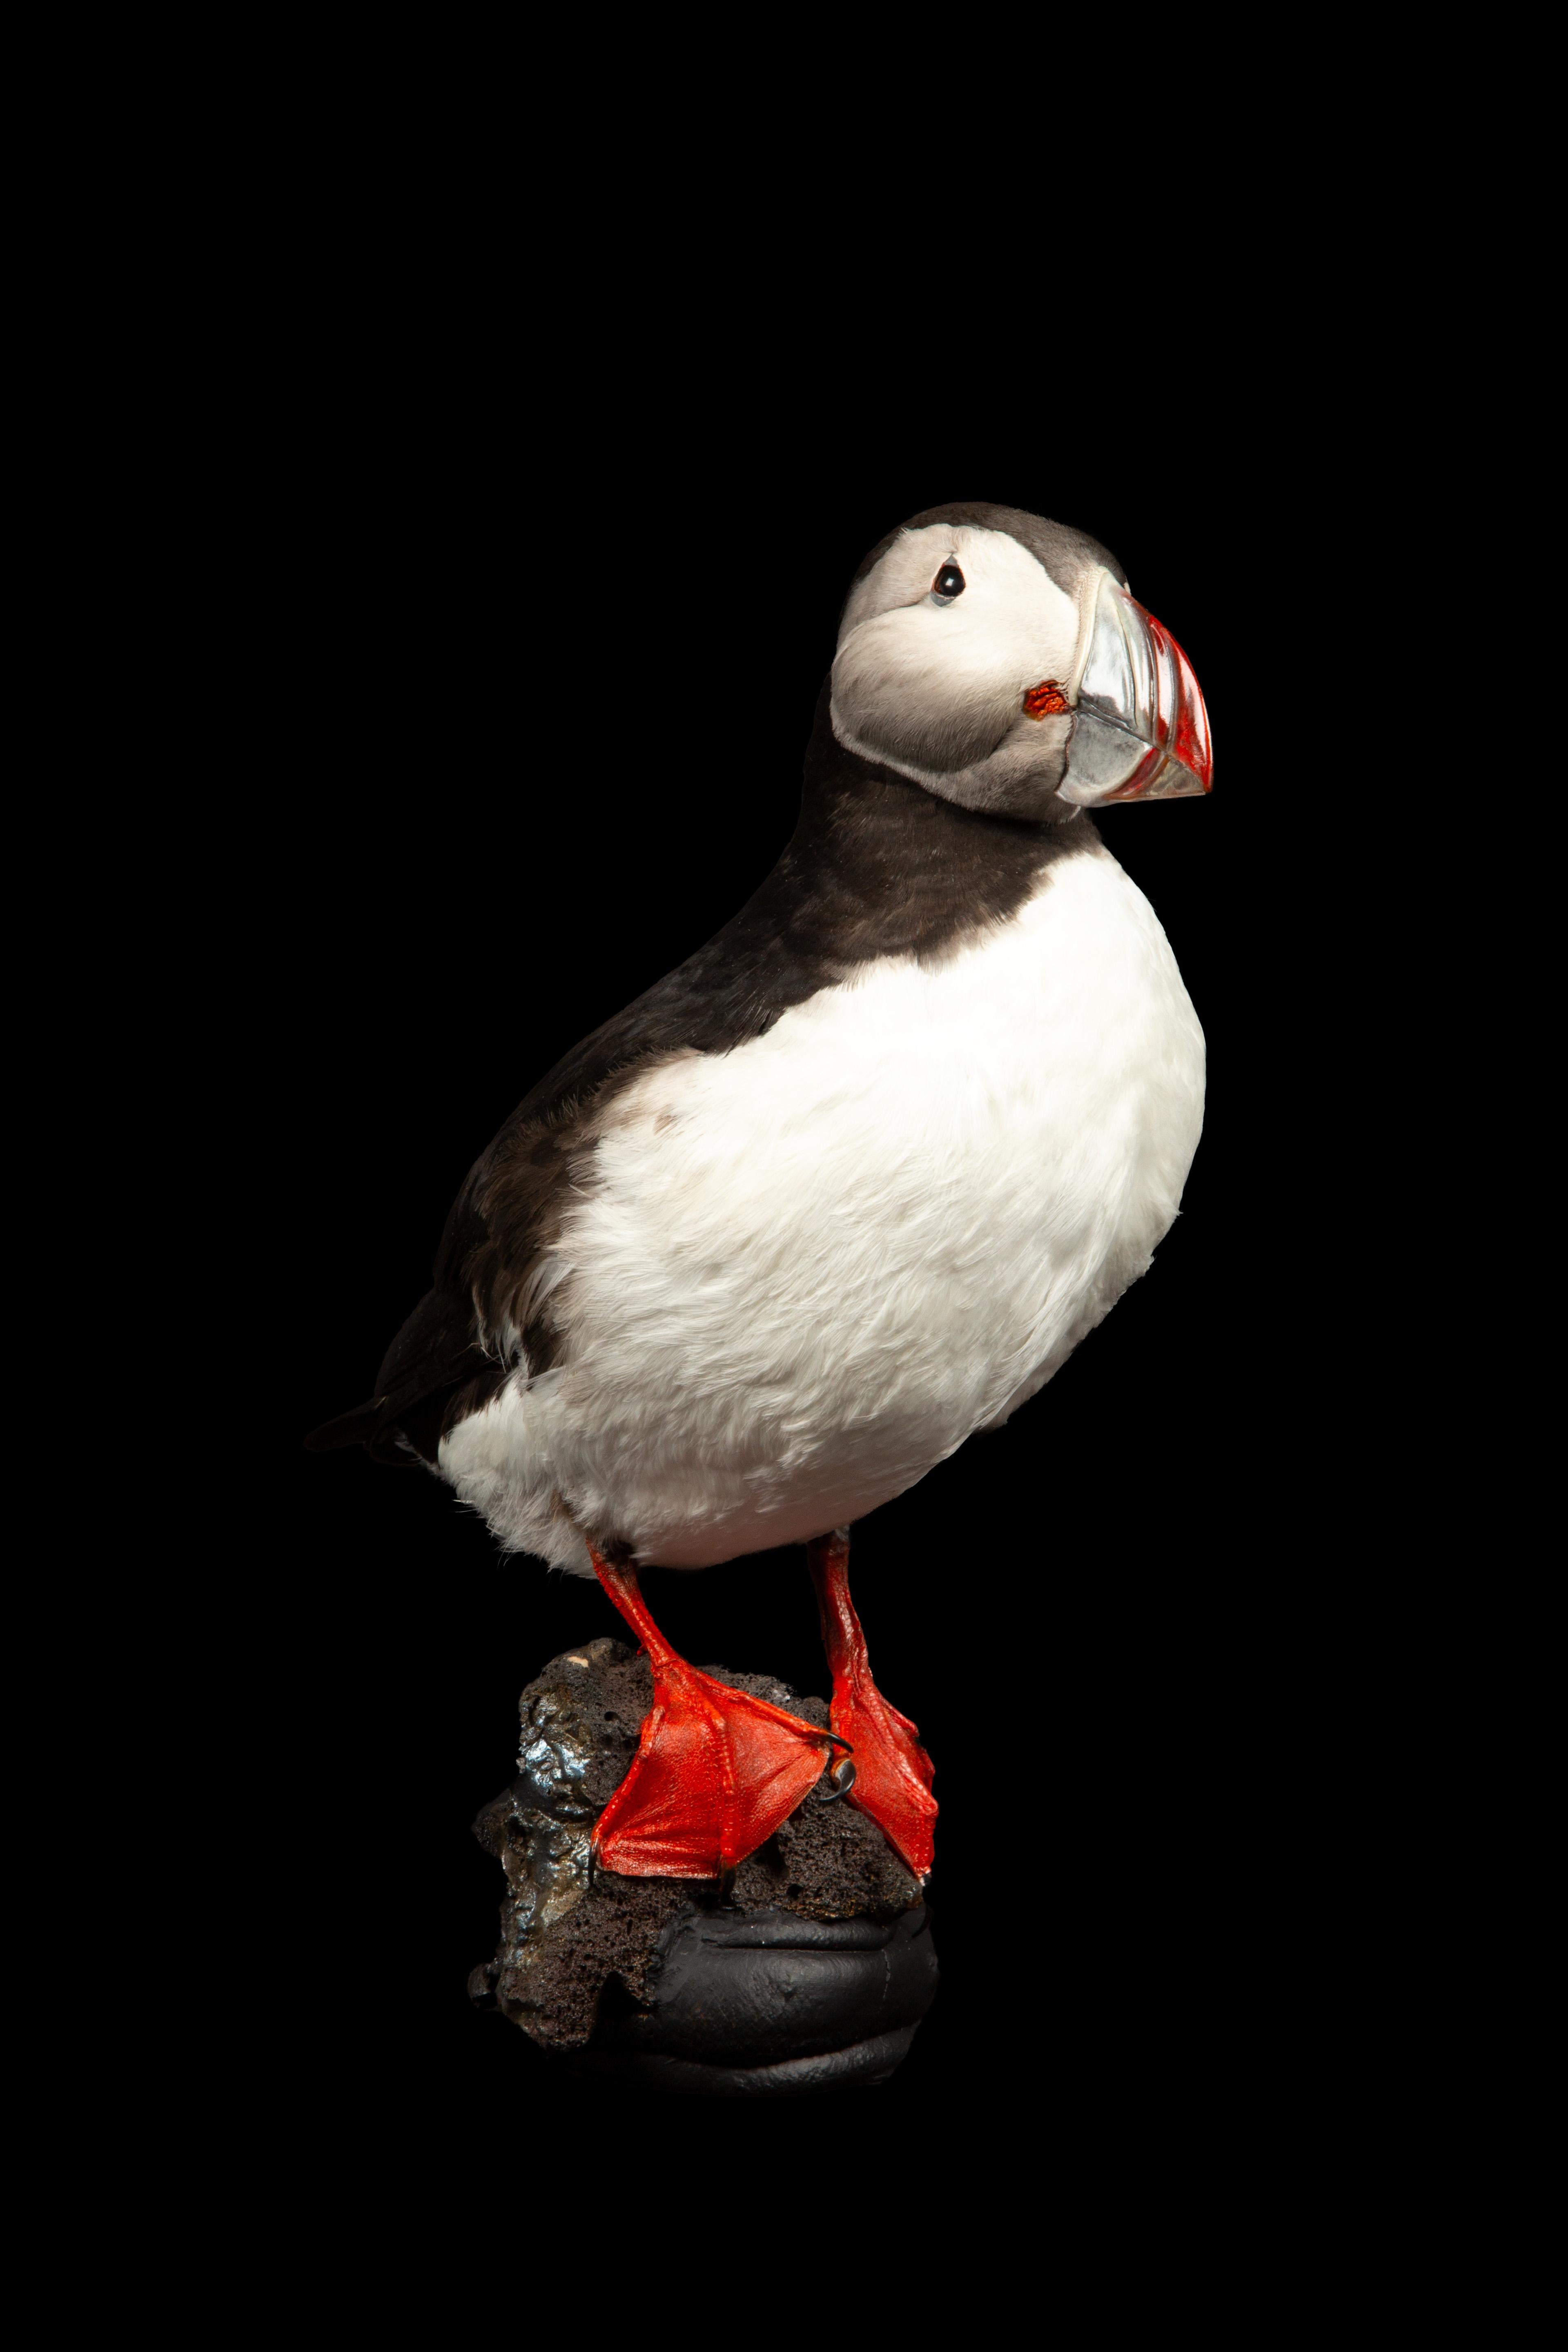 Meticulously crafted Taxidermy Atlantic Puffin Bird (Fratercula arctica), also known as the common puffin, a remarkable specimen from the auk family. This exquisite avian creation showcases the distinctive features of the Atlantic puffin, the sole